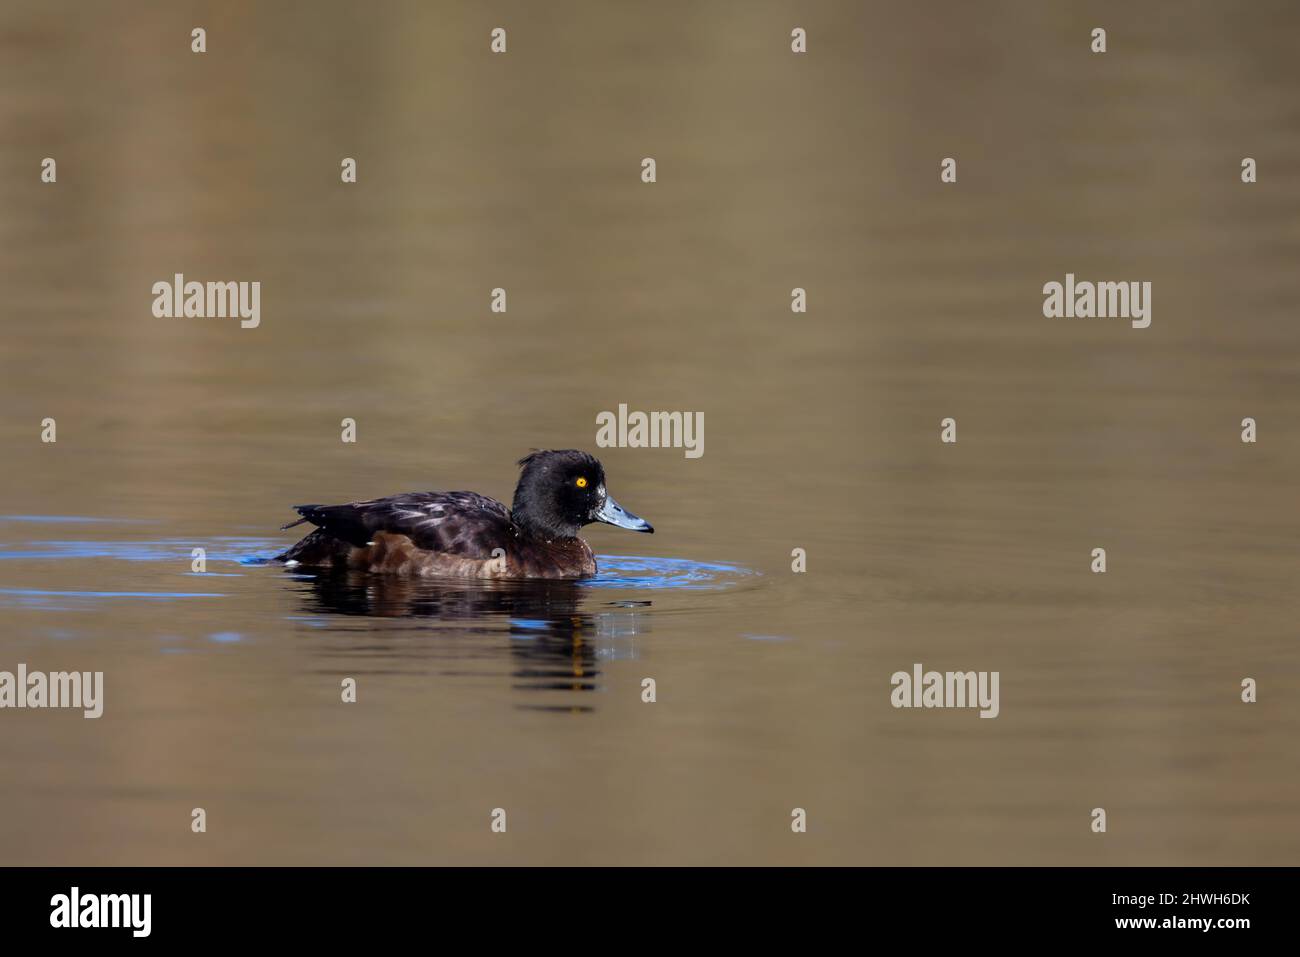 Female Tufted duck (Aythya fuligula) swimming on a lake in the nature protection area Mönchbruch near Frankfurt, Germany. Stock Photo